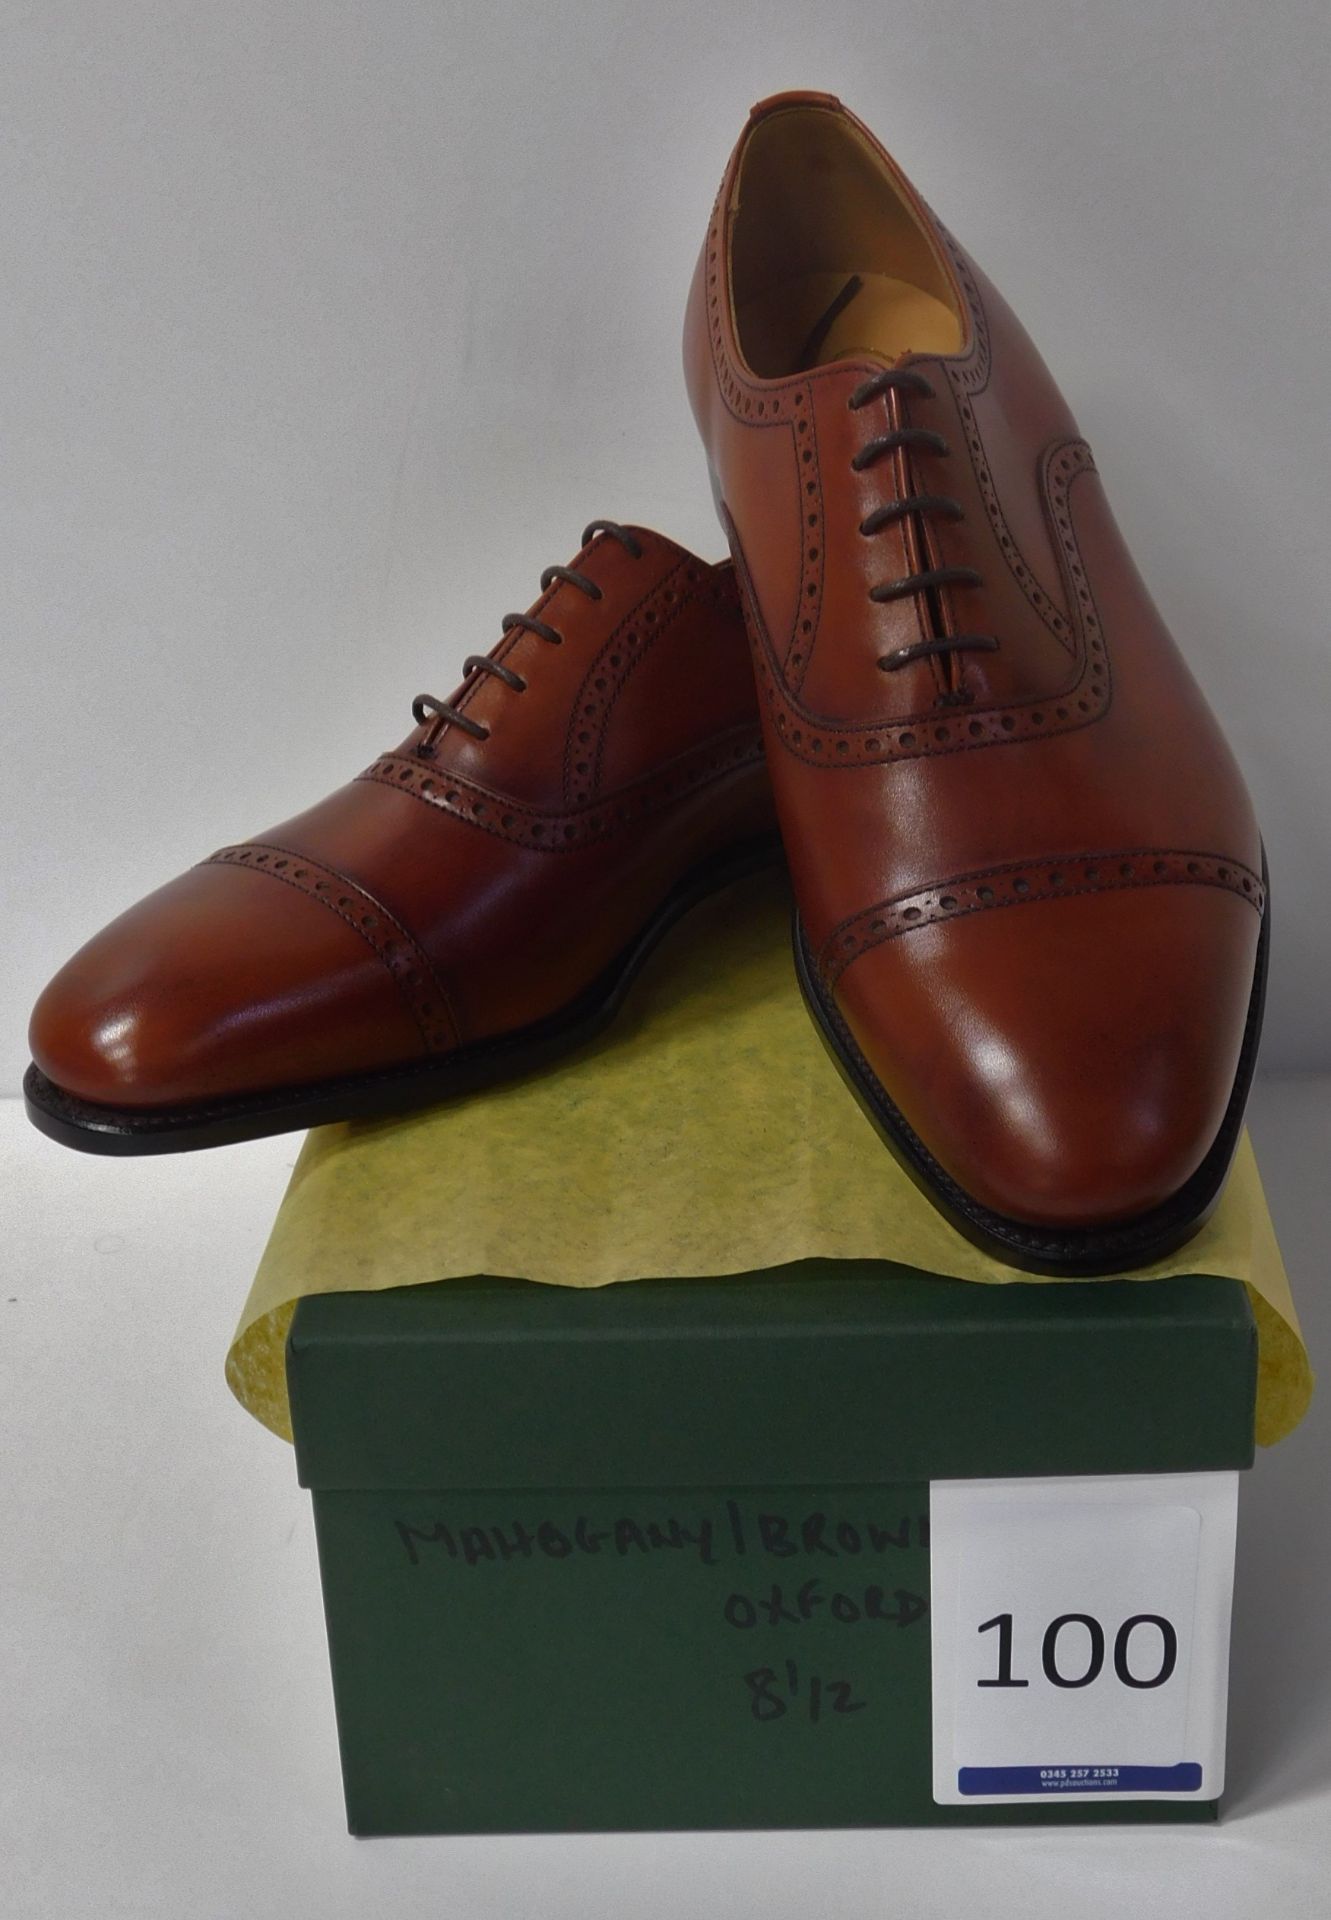 Pair of Alfred Sargent Mahogany Oxfords, Size 8.5 (Slight Seconds) (Location: Brentwood - See